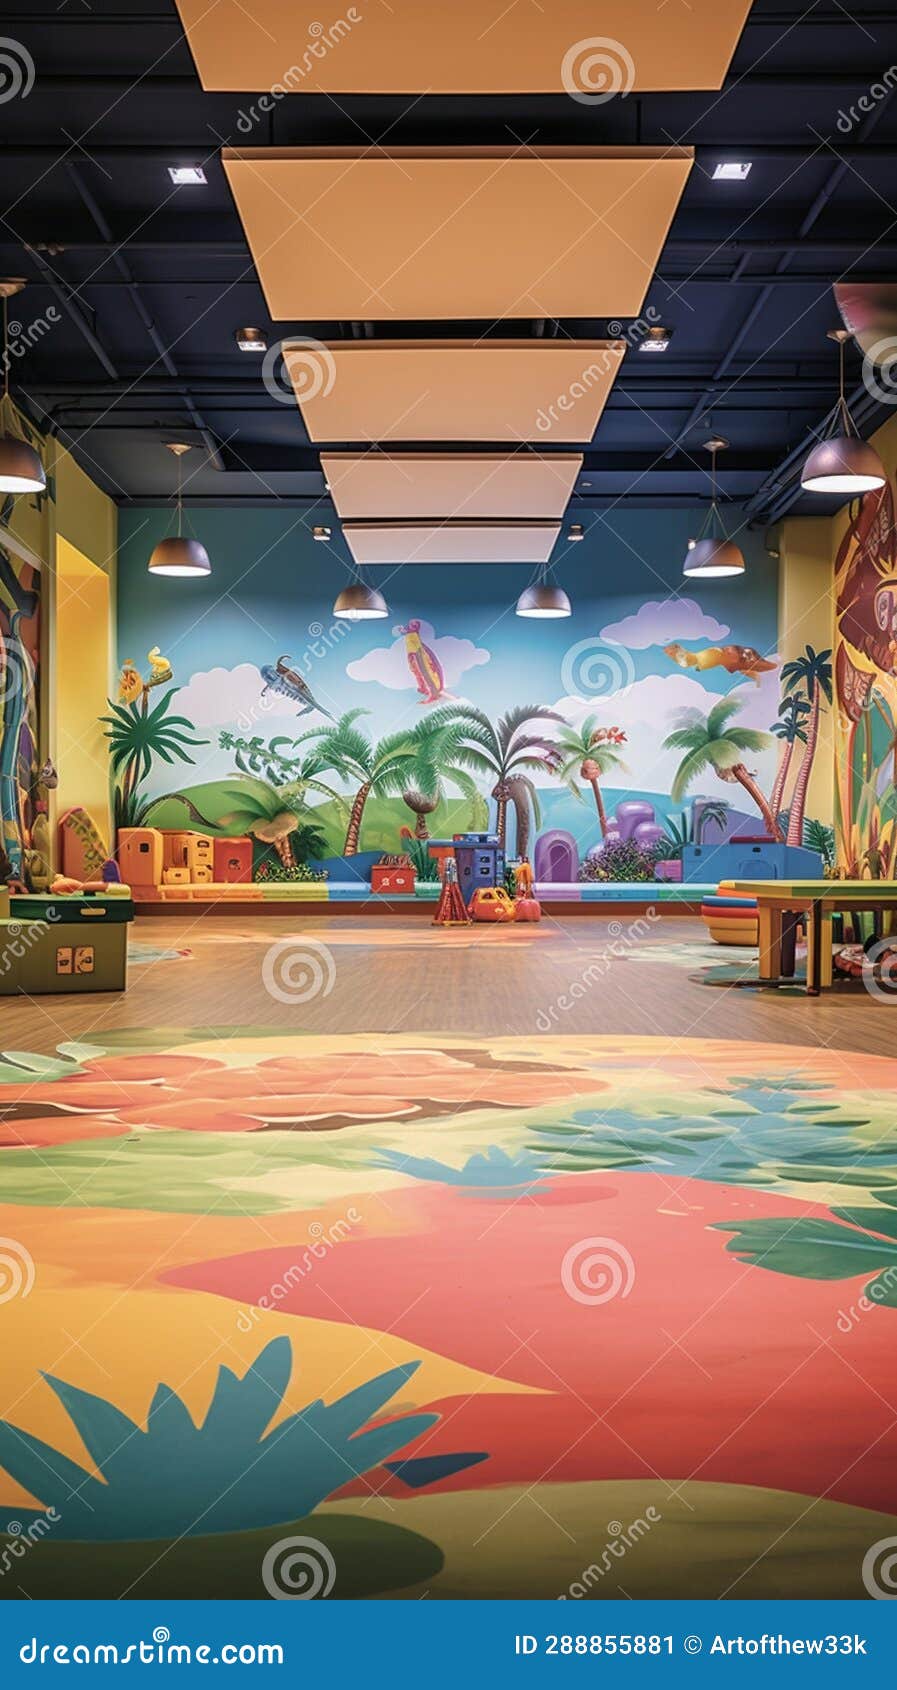 vibrant kids club: a colorful haven for family fun